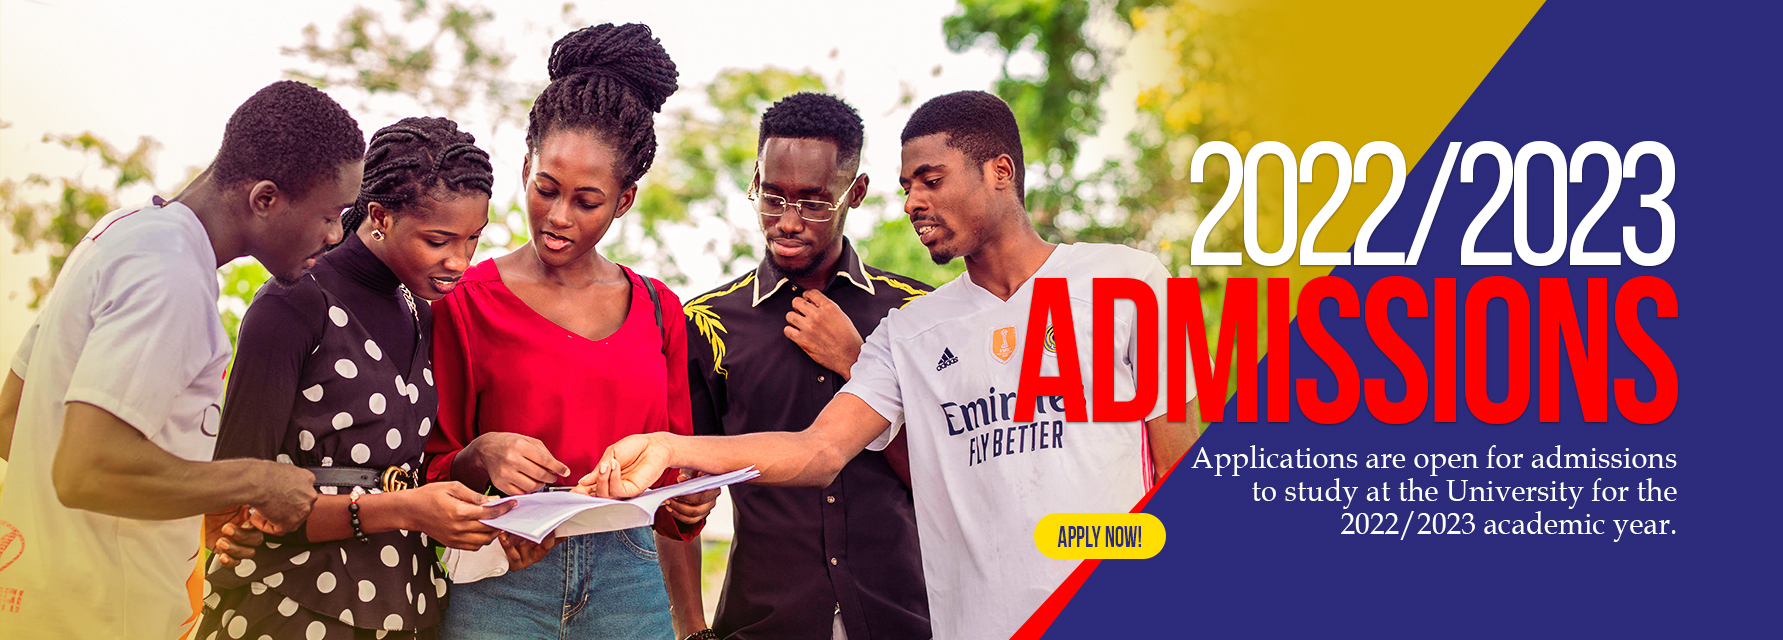 UEW Awaiting Forms 2022/2023 Academic Year: Apply for Admission Here